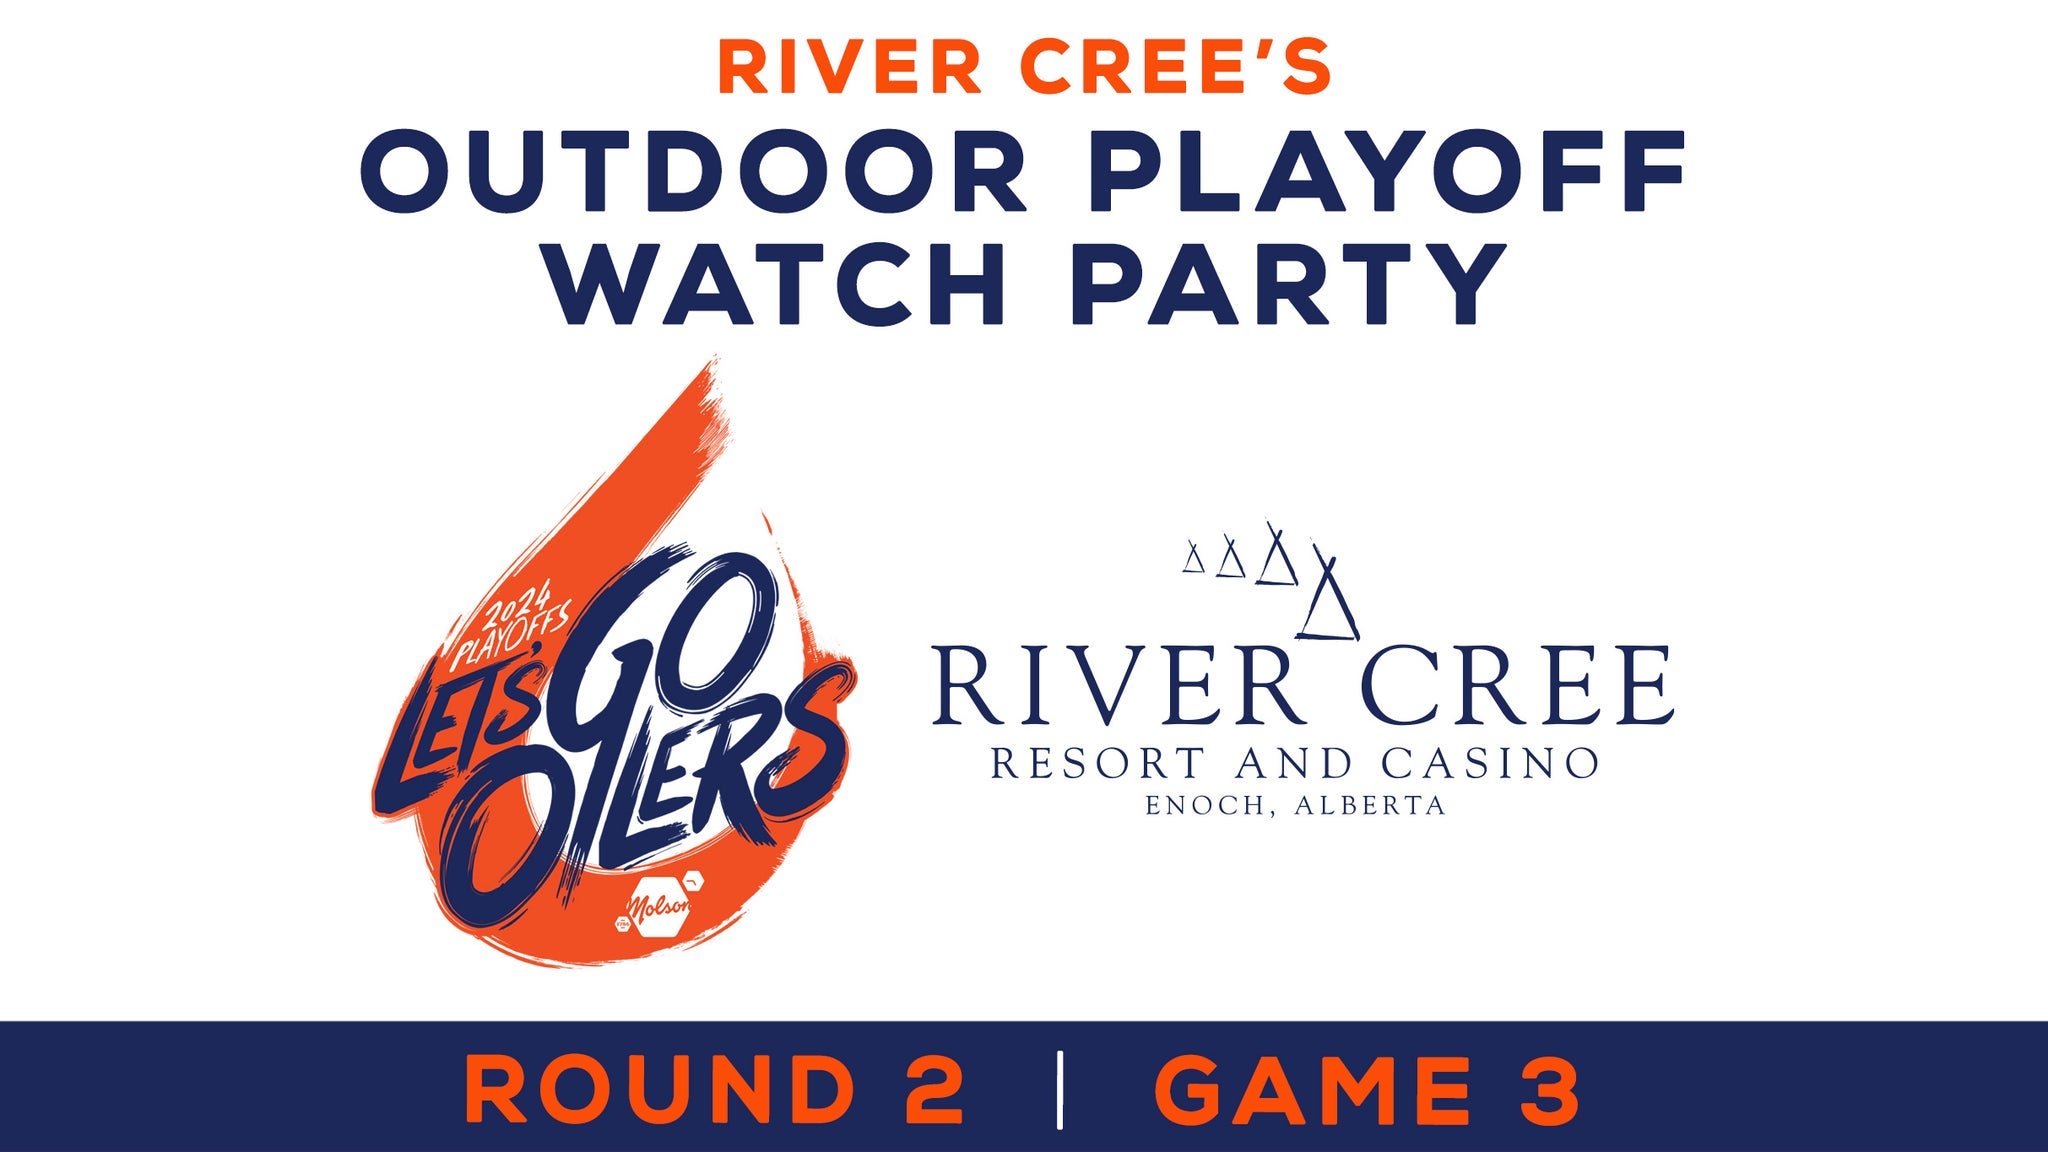 River Cree's Watch Party - Round 2 - Game 3 in Enoch promo photo for First Nation Discount-Status Card Holder presale offer code